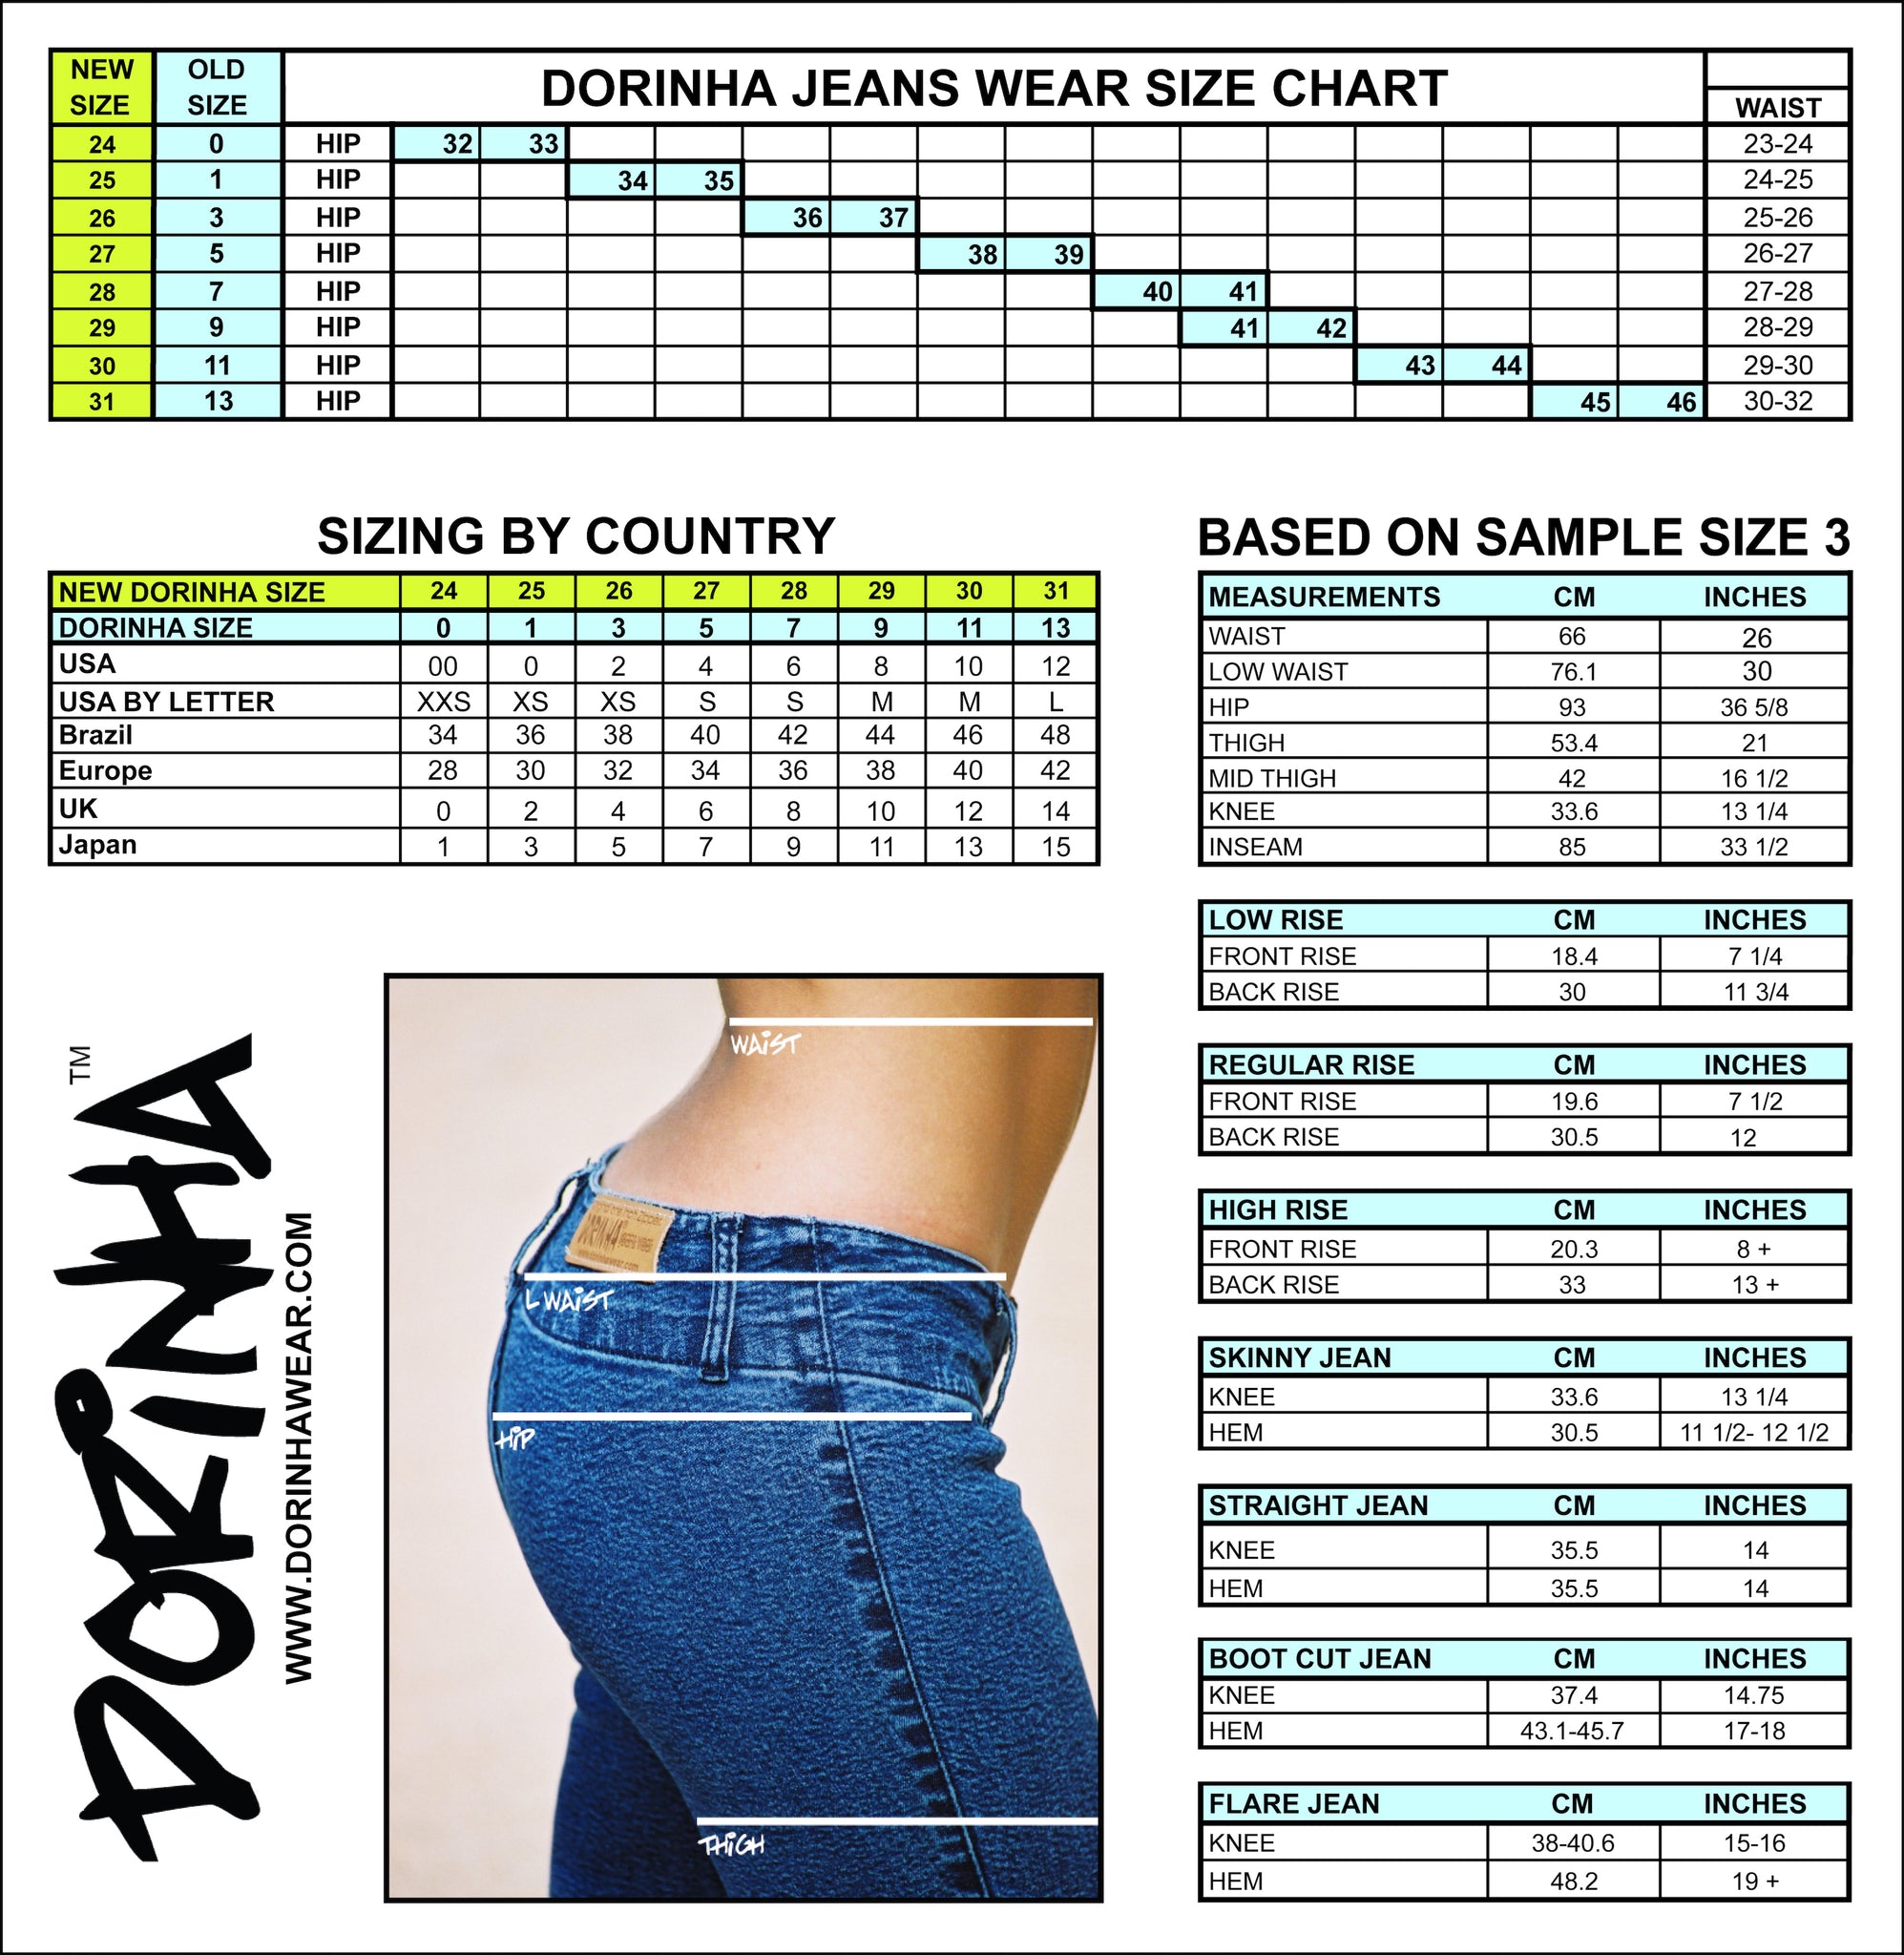 jeans rise chart